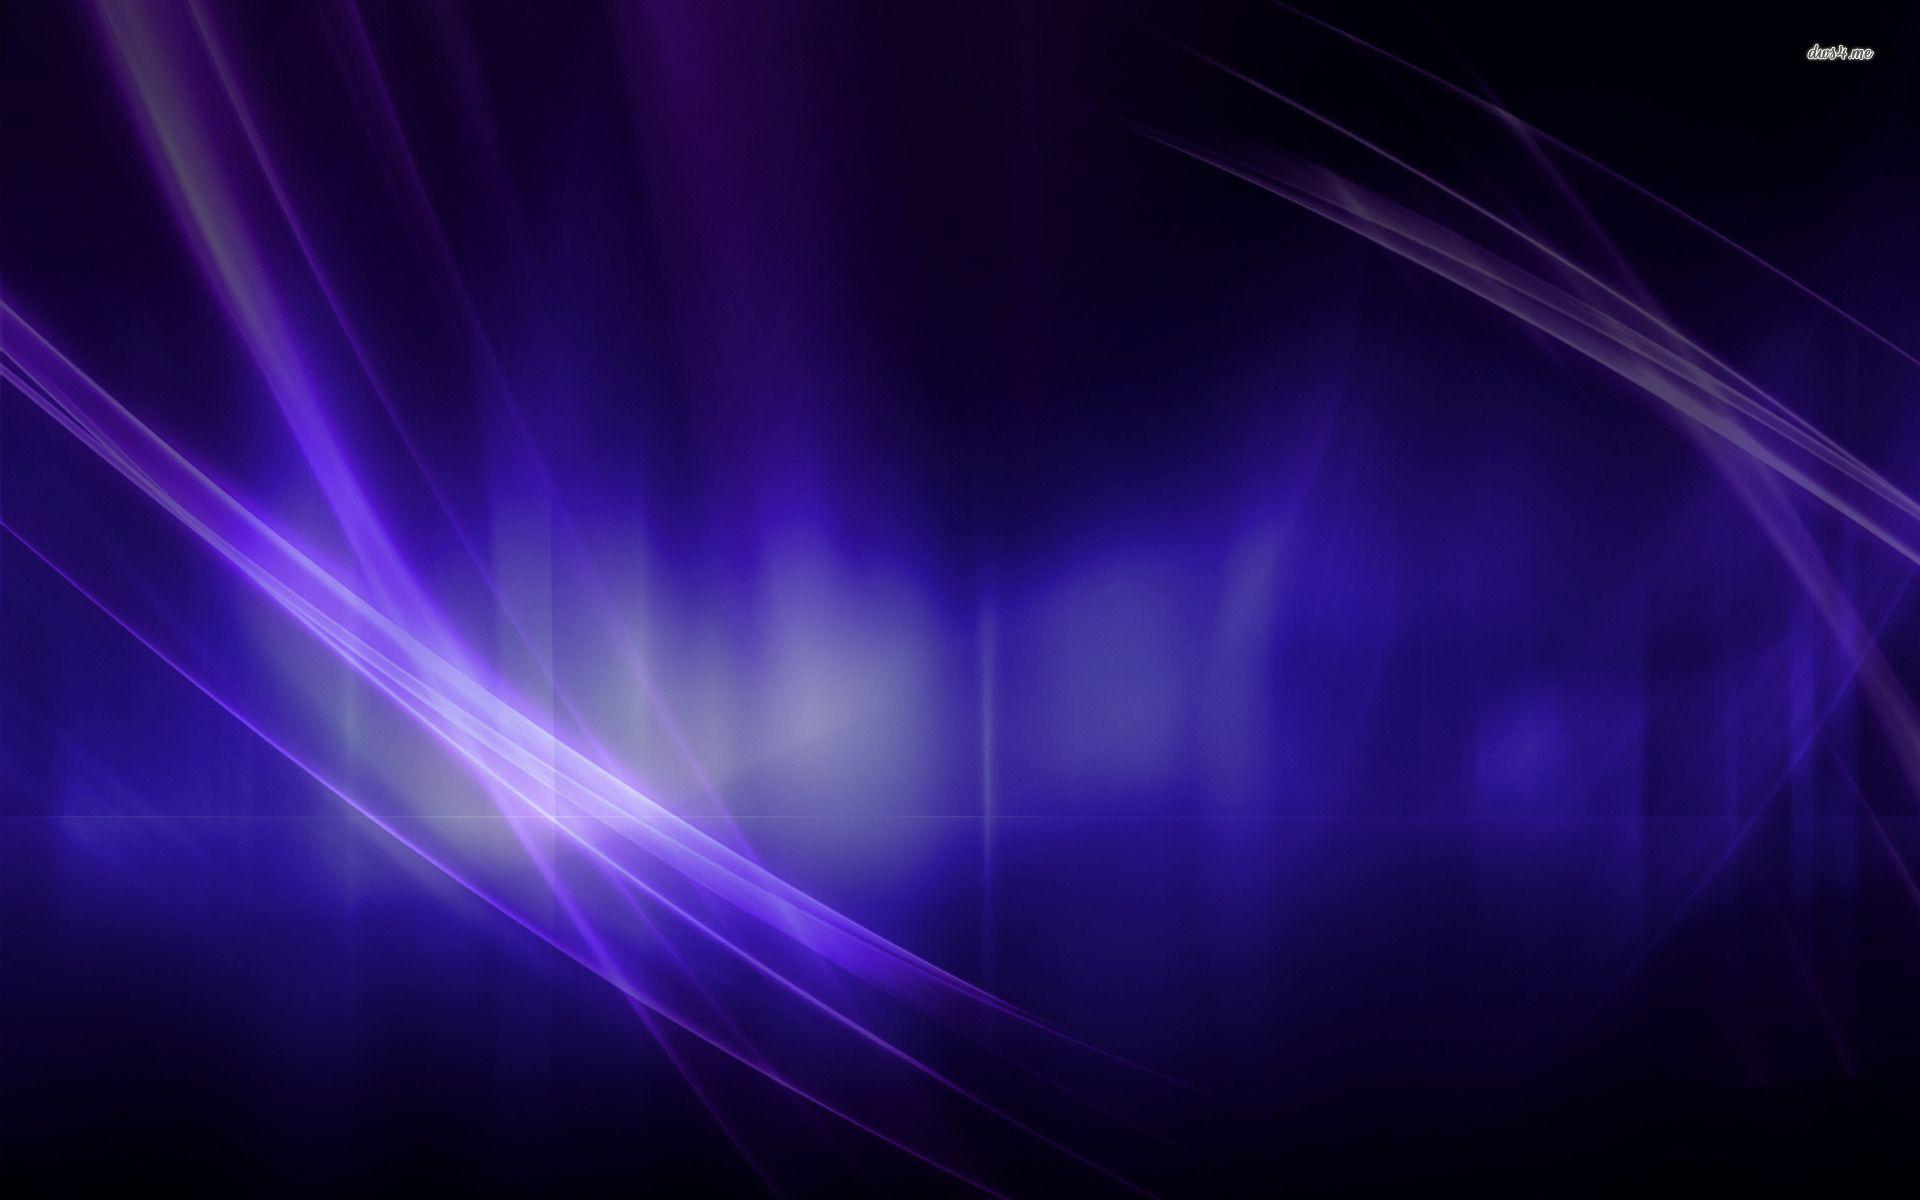 Black and Purple Abstract HD Wallpaper For Mac 539